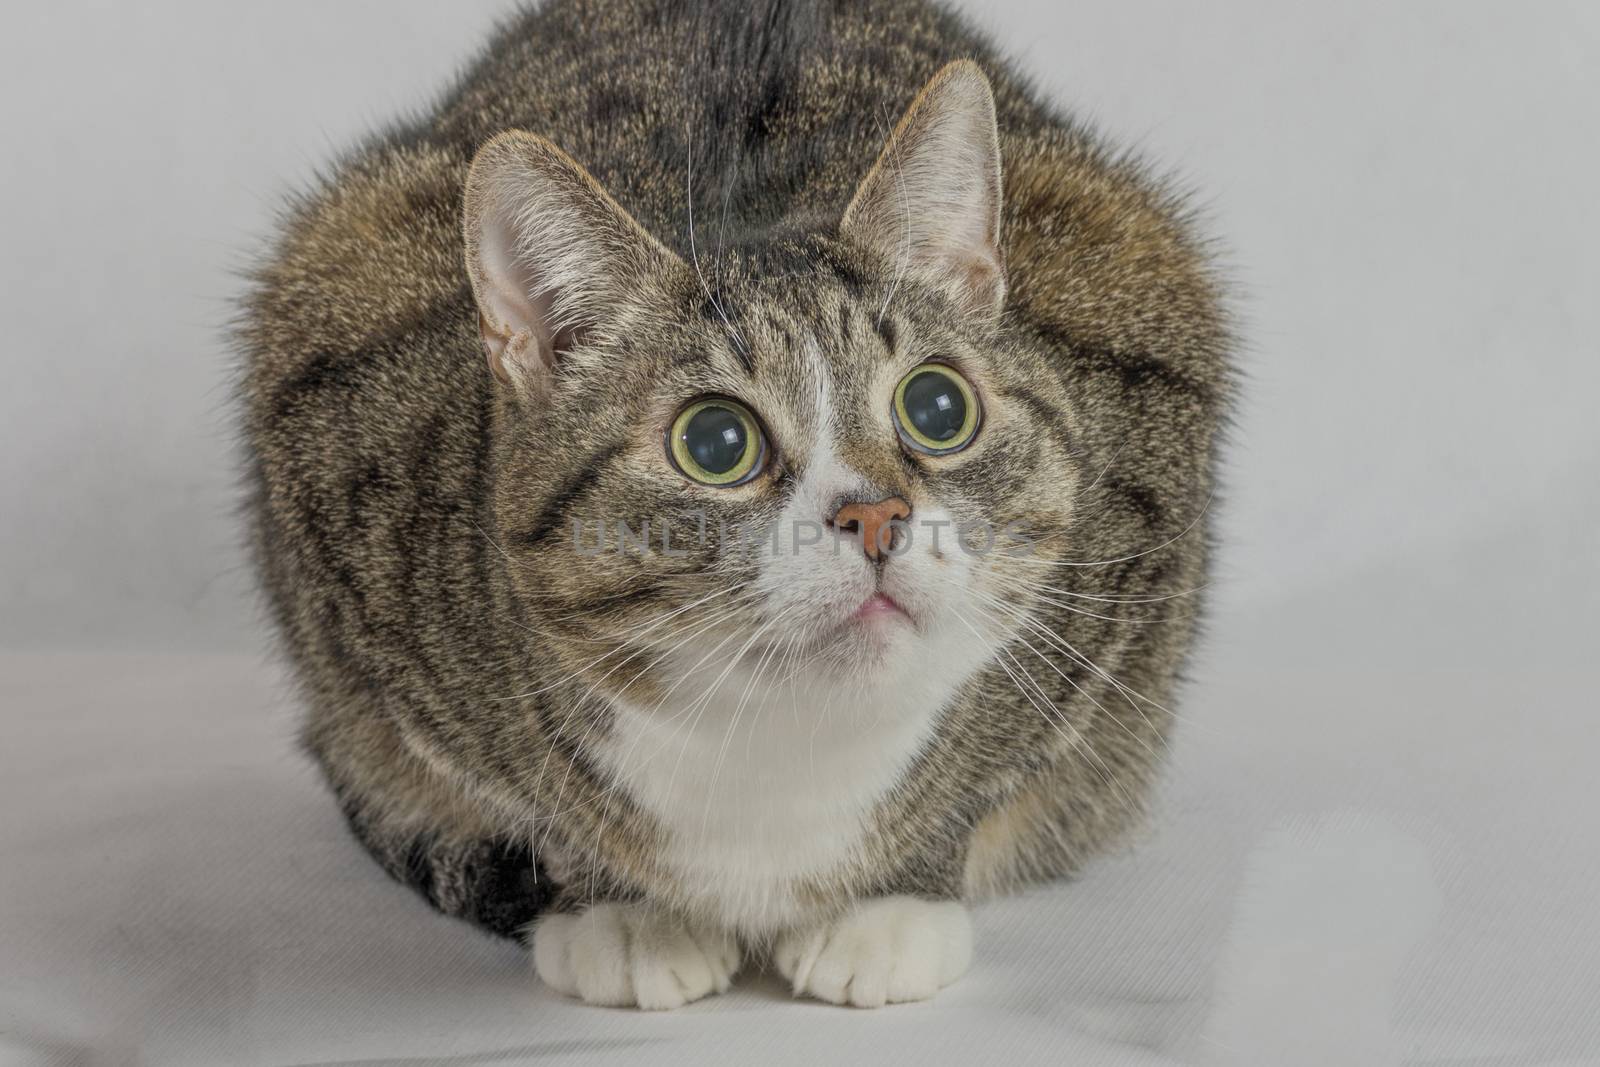 gray and white tabby cat with big round eyes close up